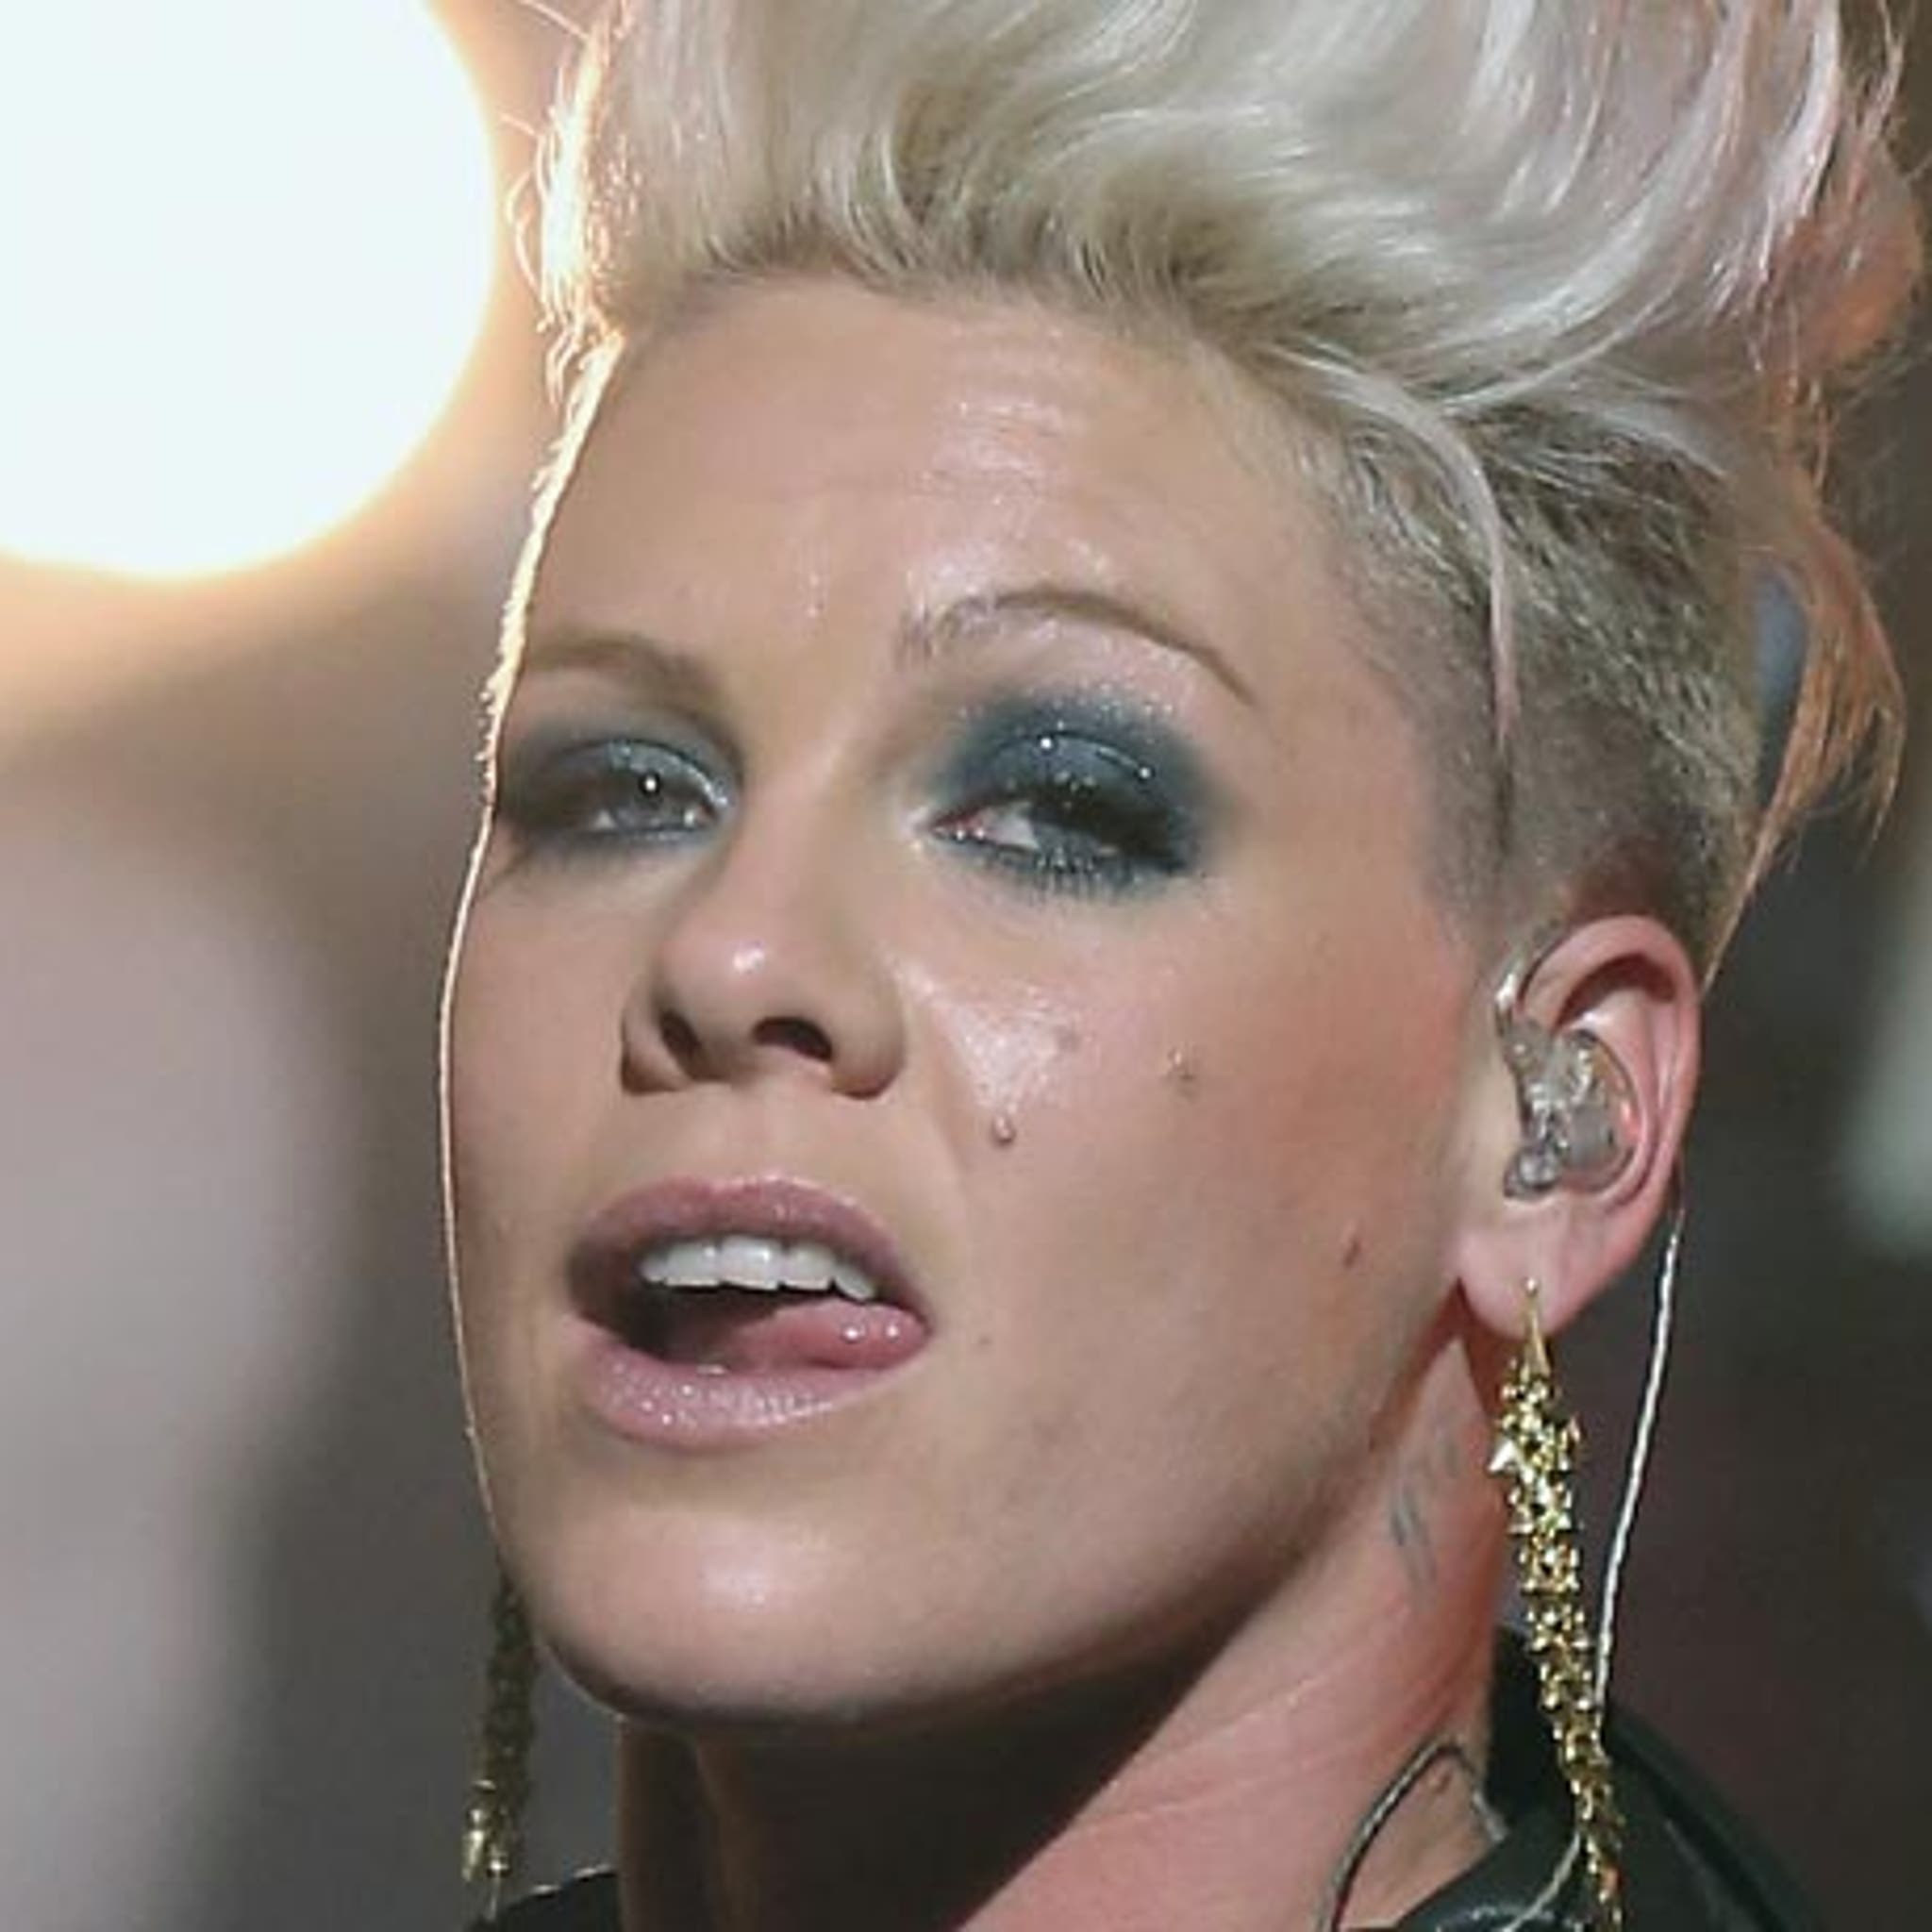 P Nk Porn - P!nk Steps Out With Long Hair, Looks ...